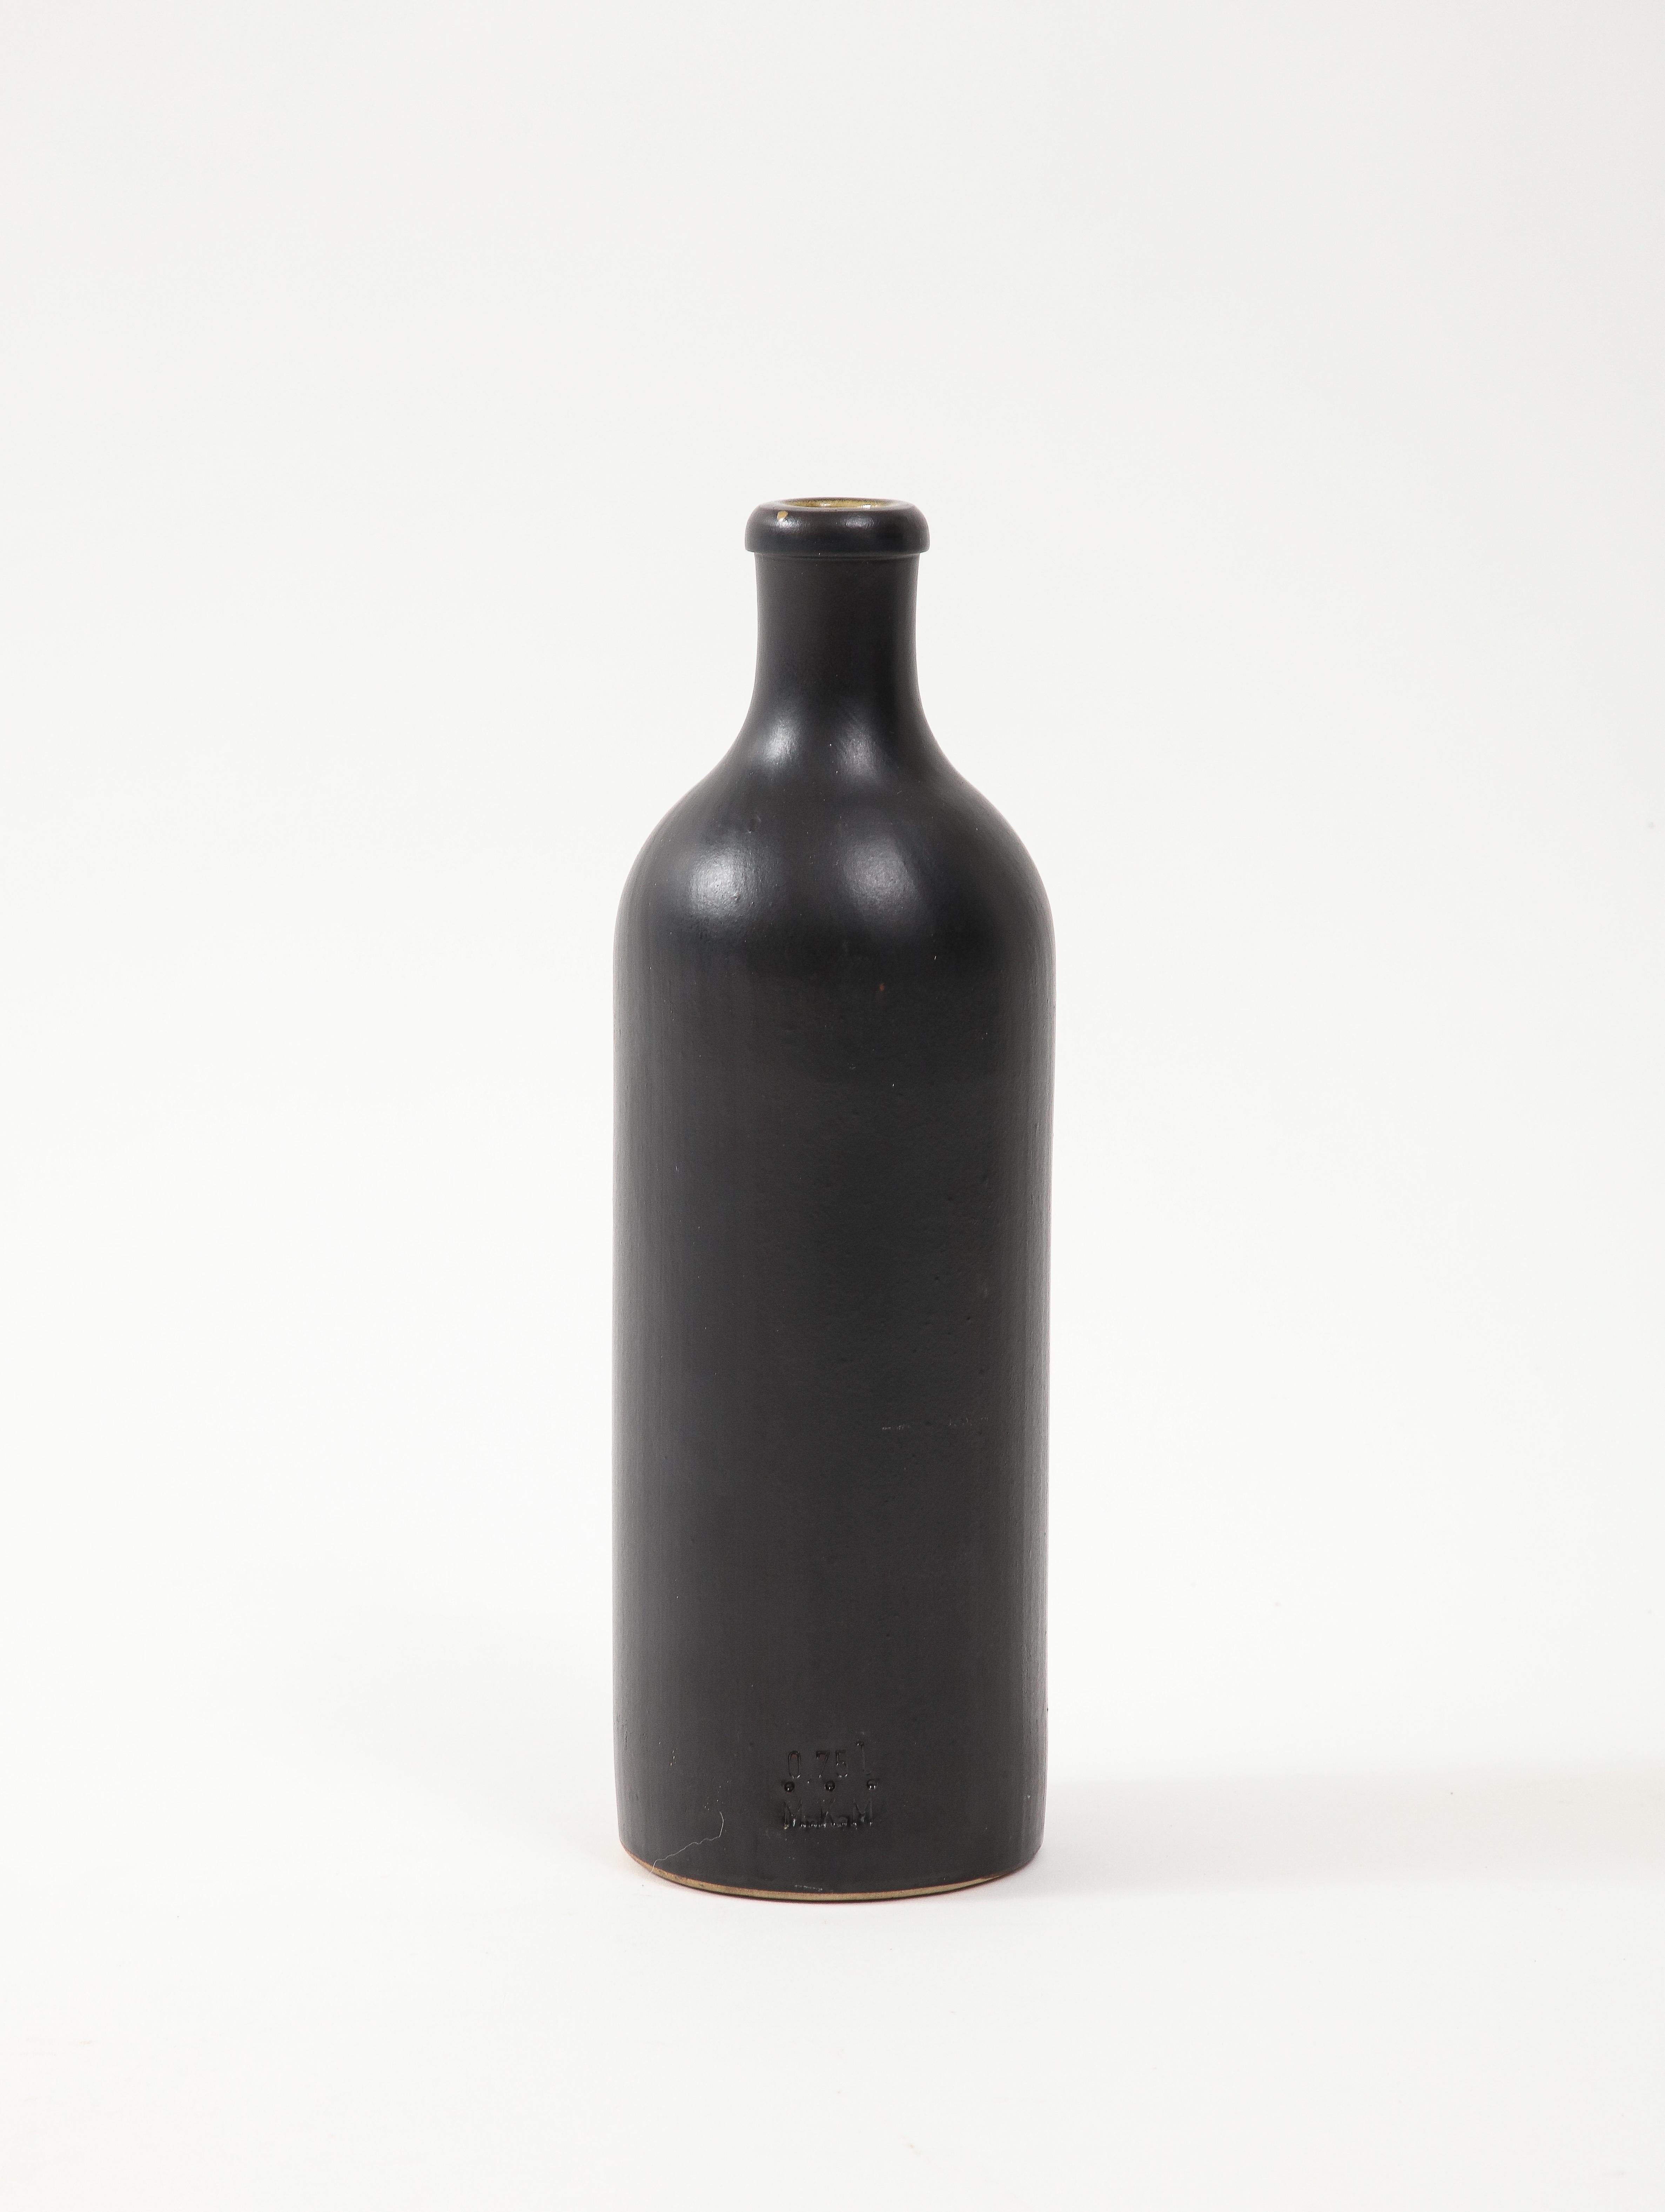 Large Georges Jouve Style Period Black Matte Vase, France, c. 1950 In Good Condition For Sale In Brooklyn, NY